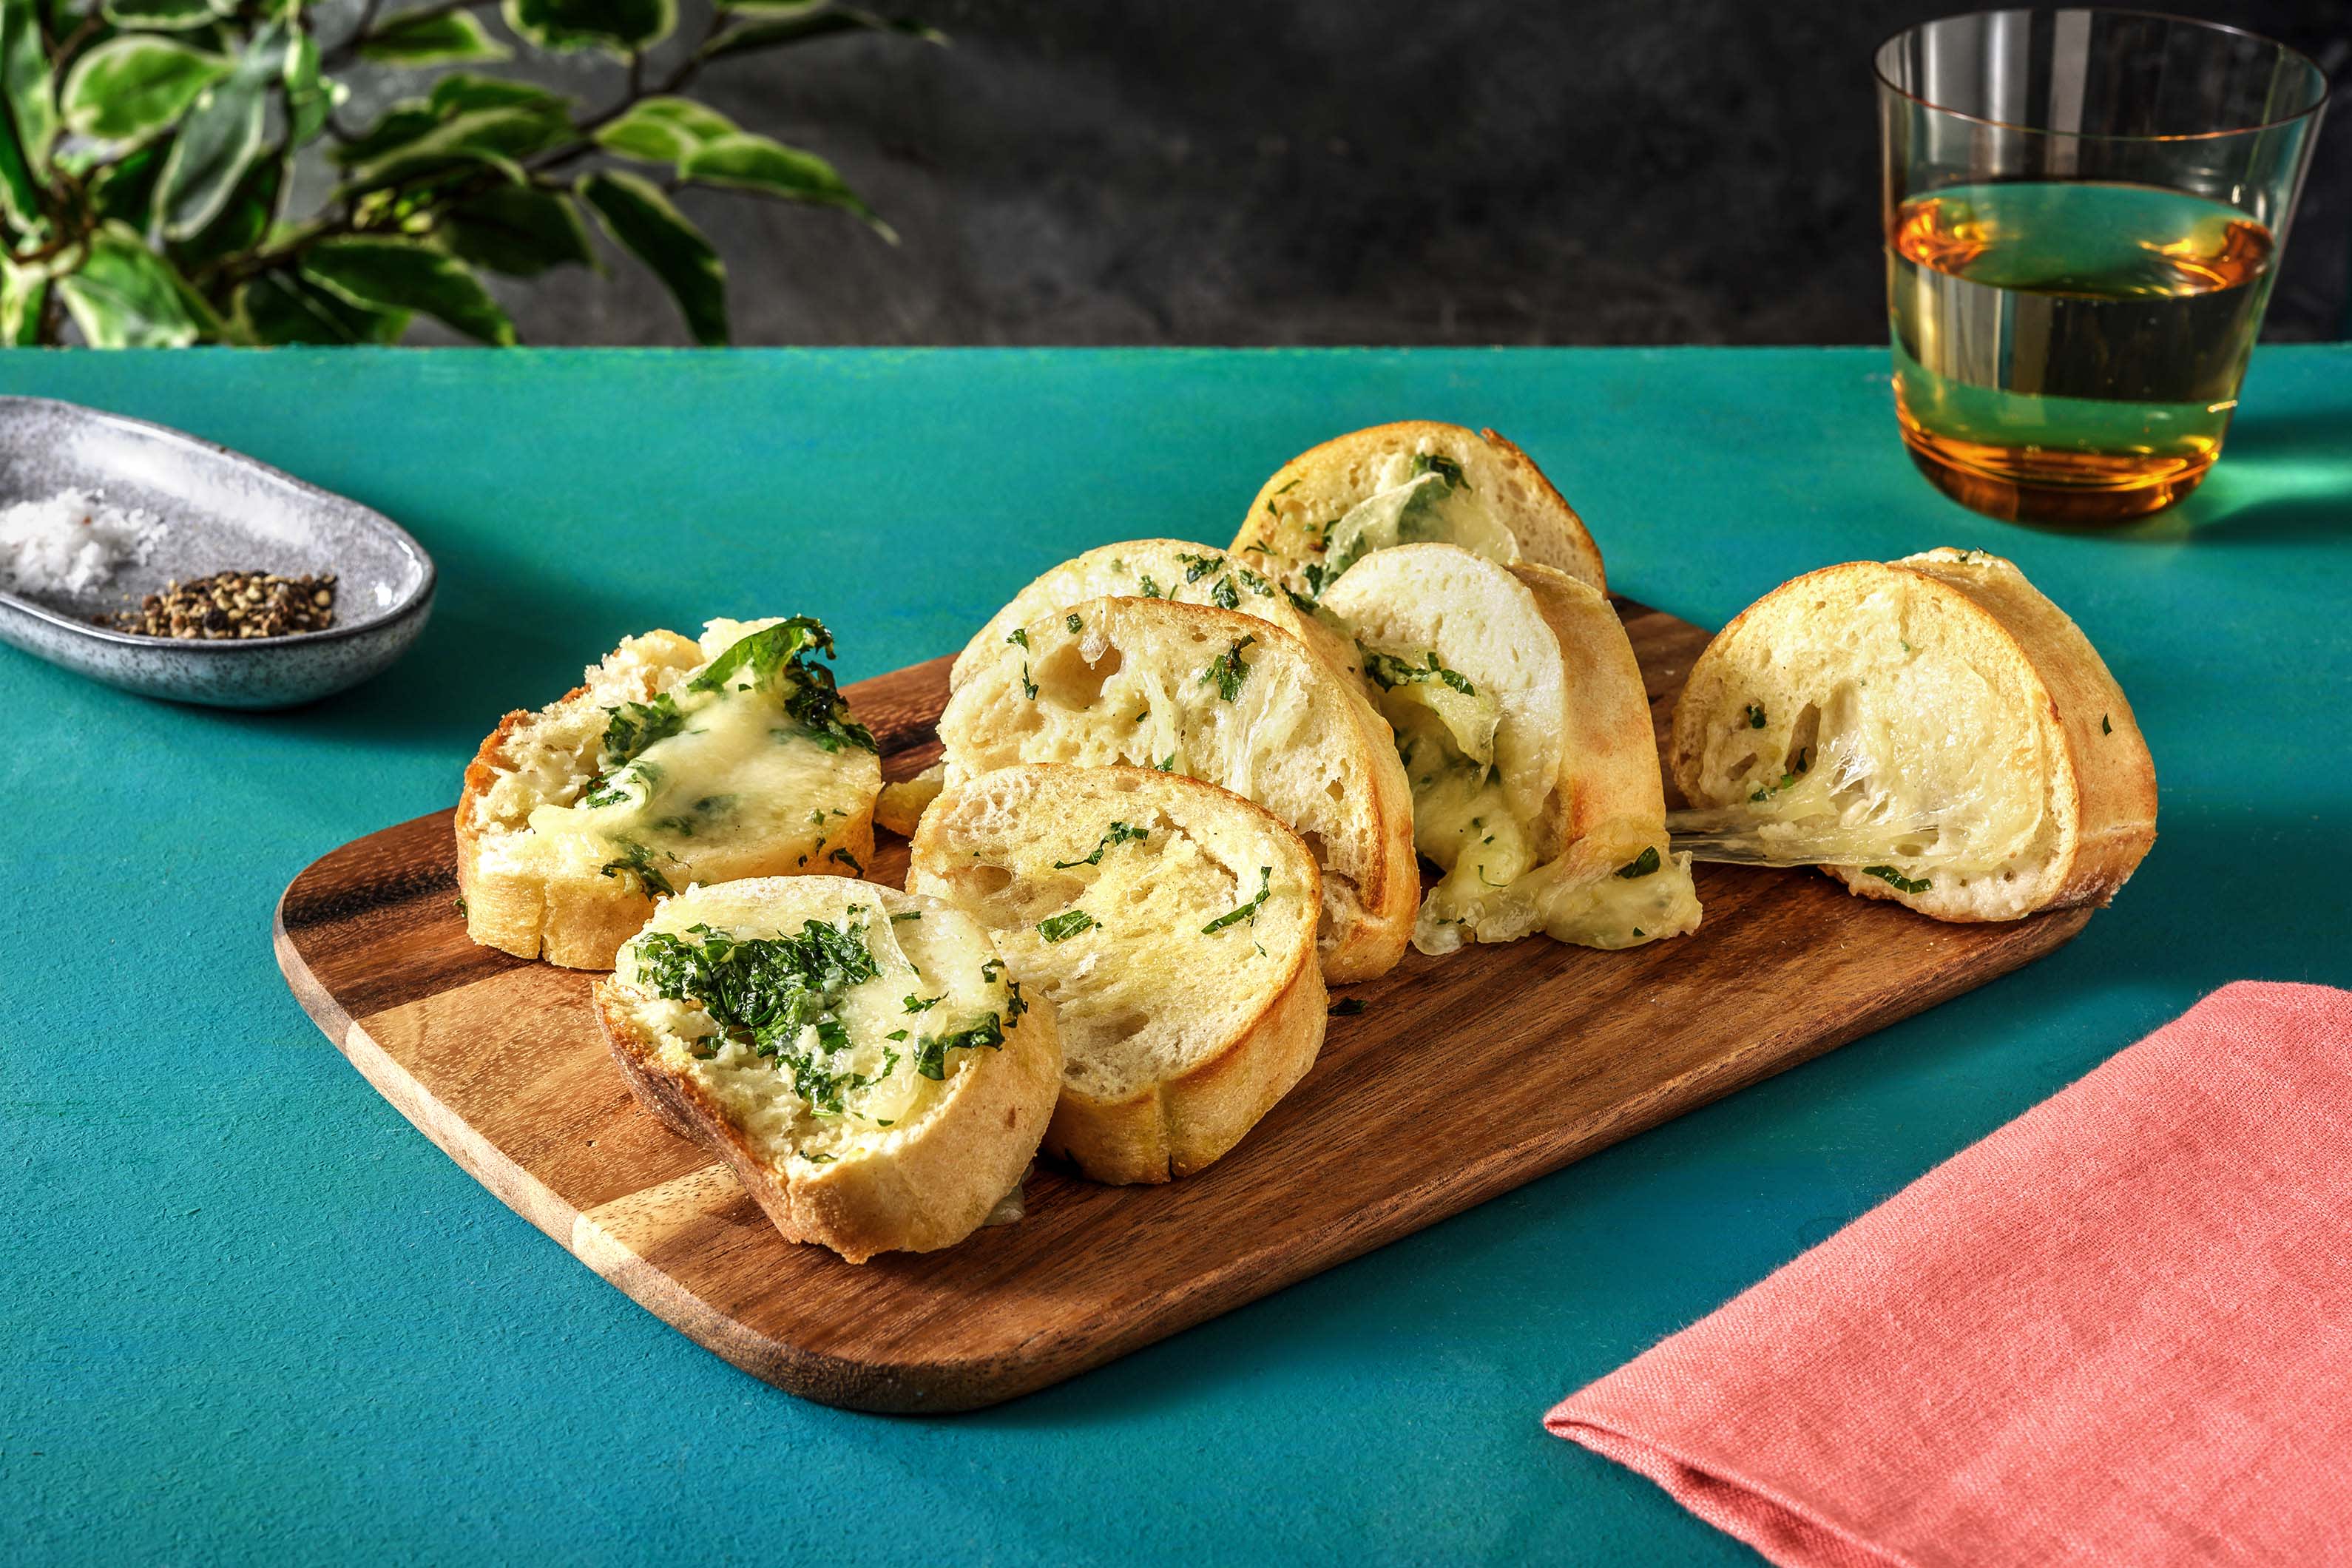 Canadians Reached for Garlic Bread When They Wanted a Little Bit of Comfort